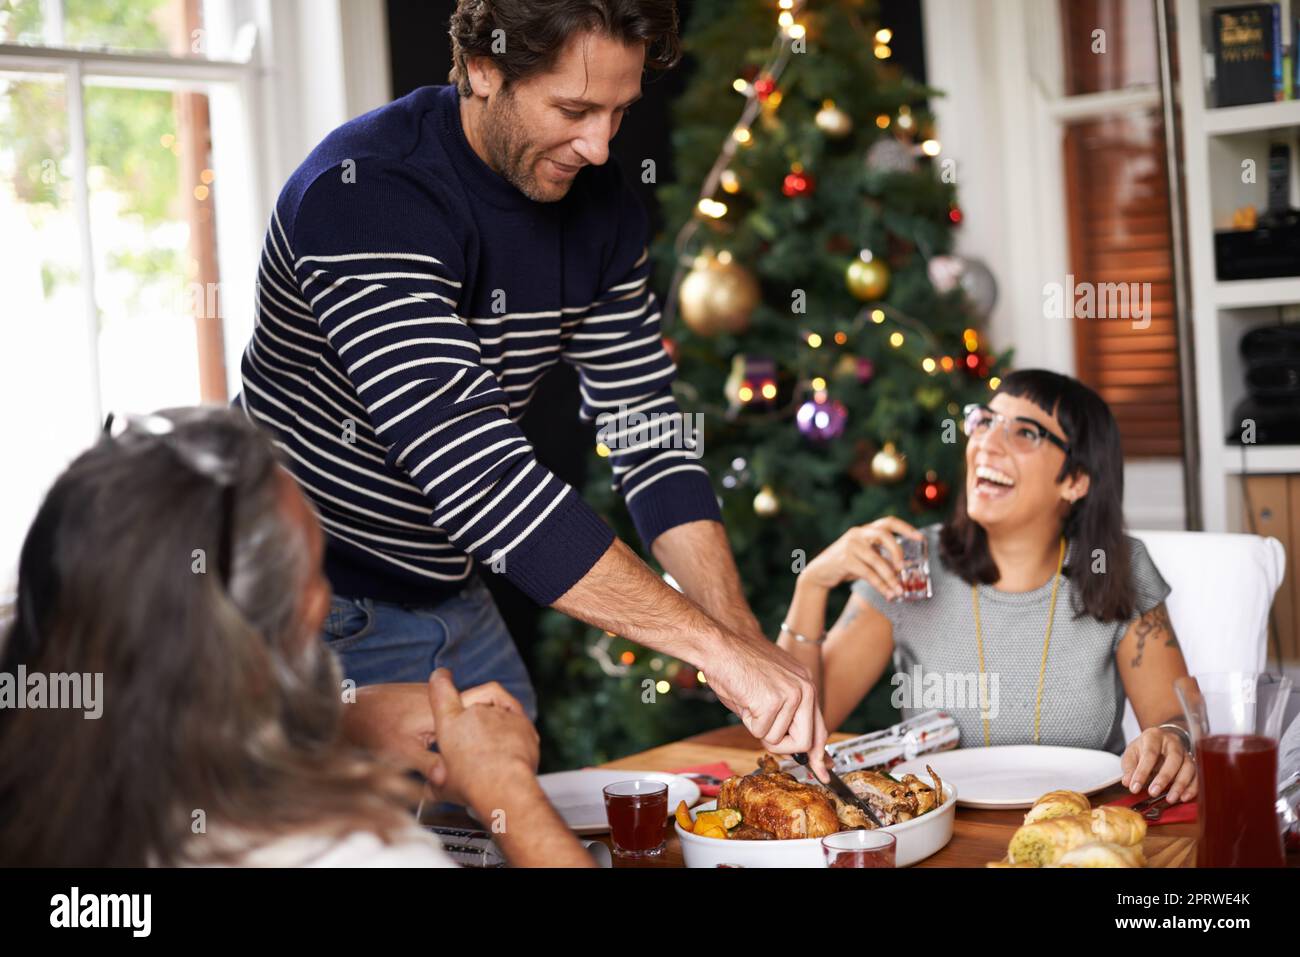 Carve faster - were hungry. a man carving a chicken on Christmas. Stock Photo